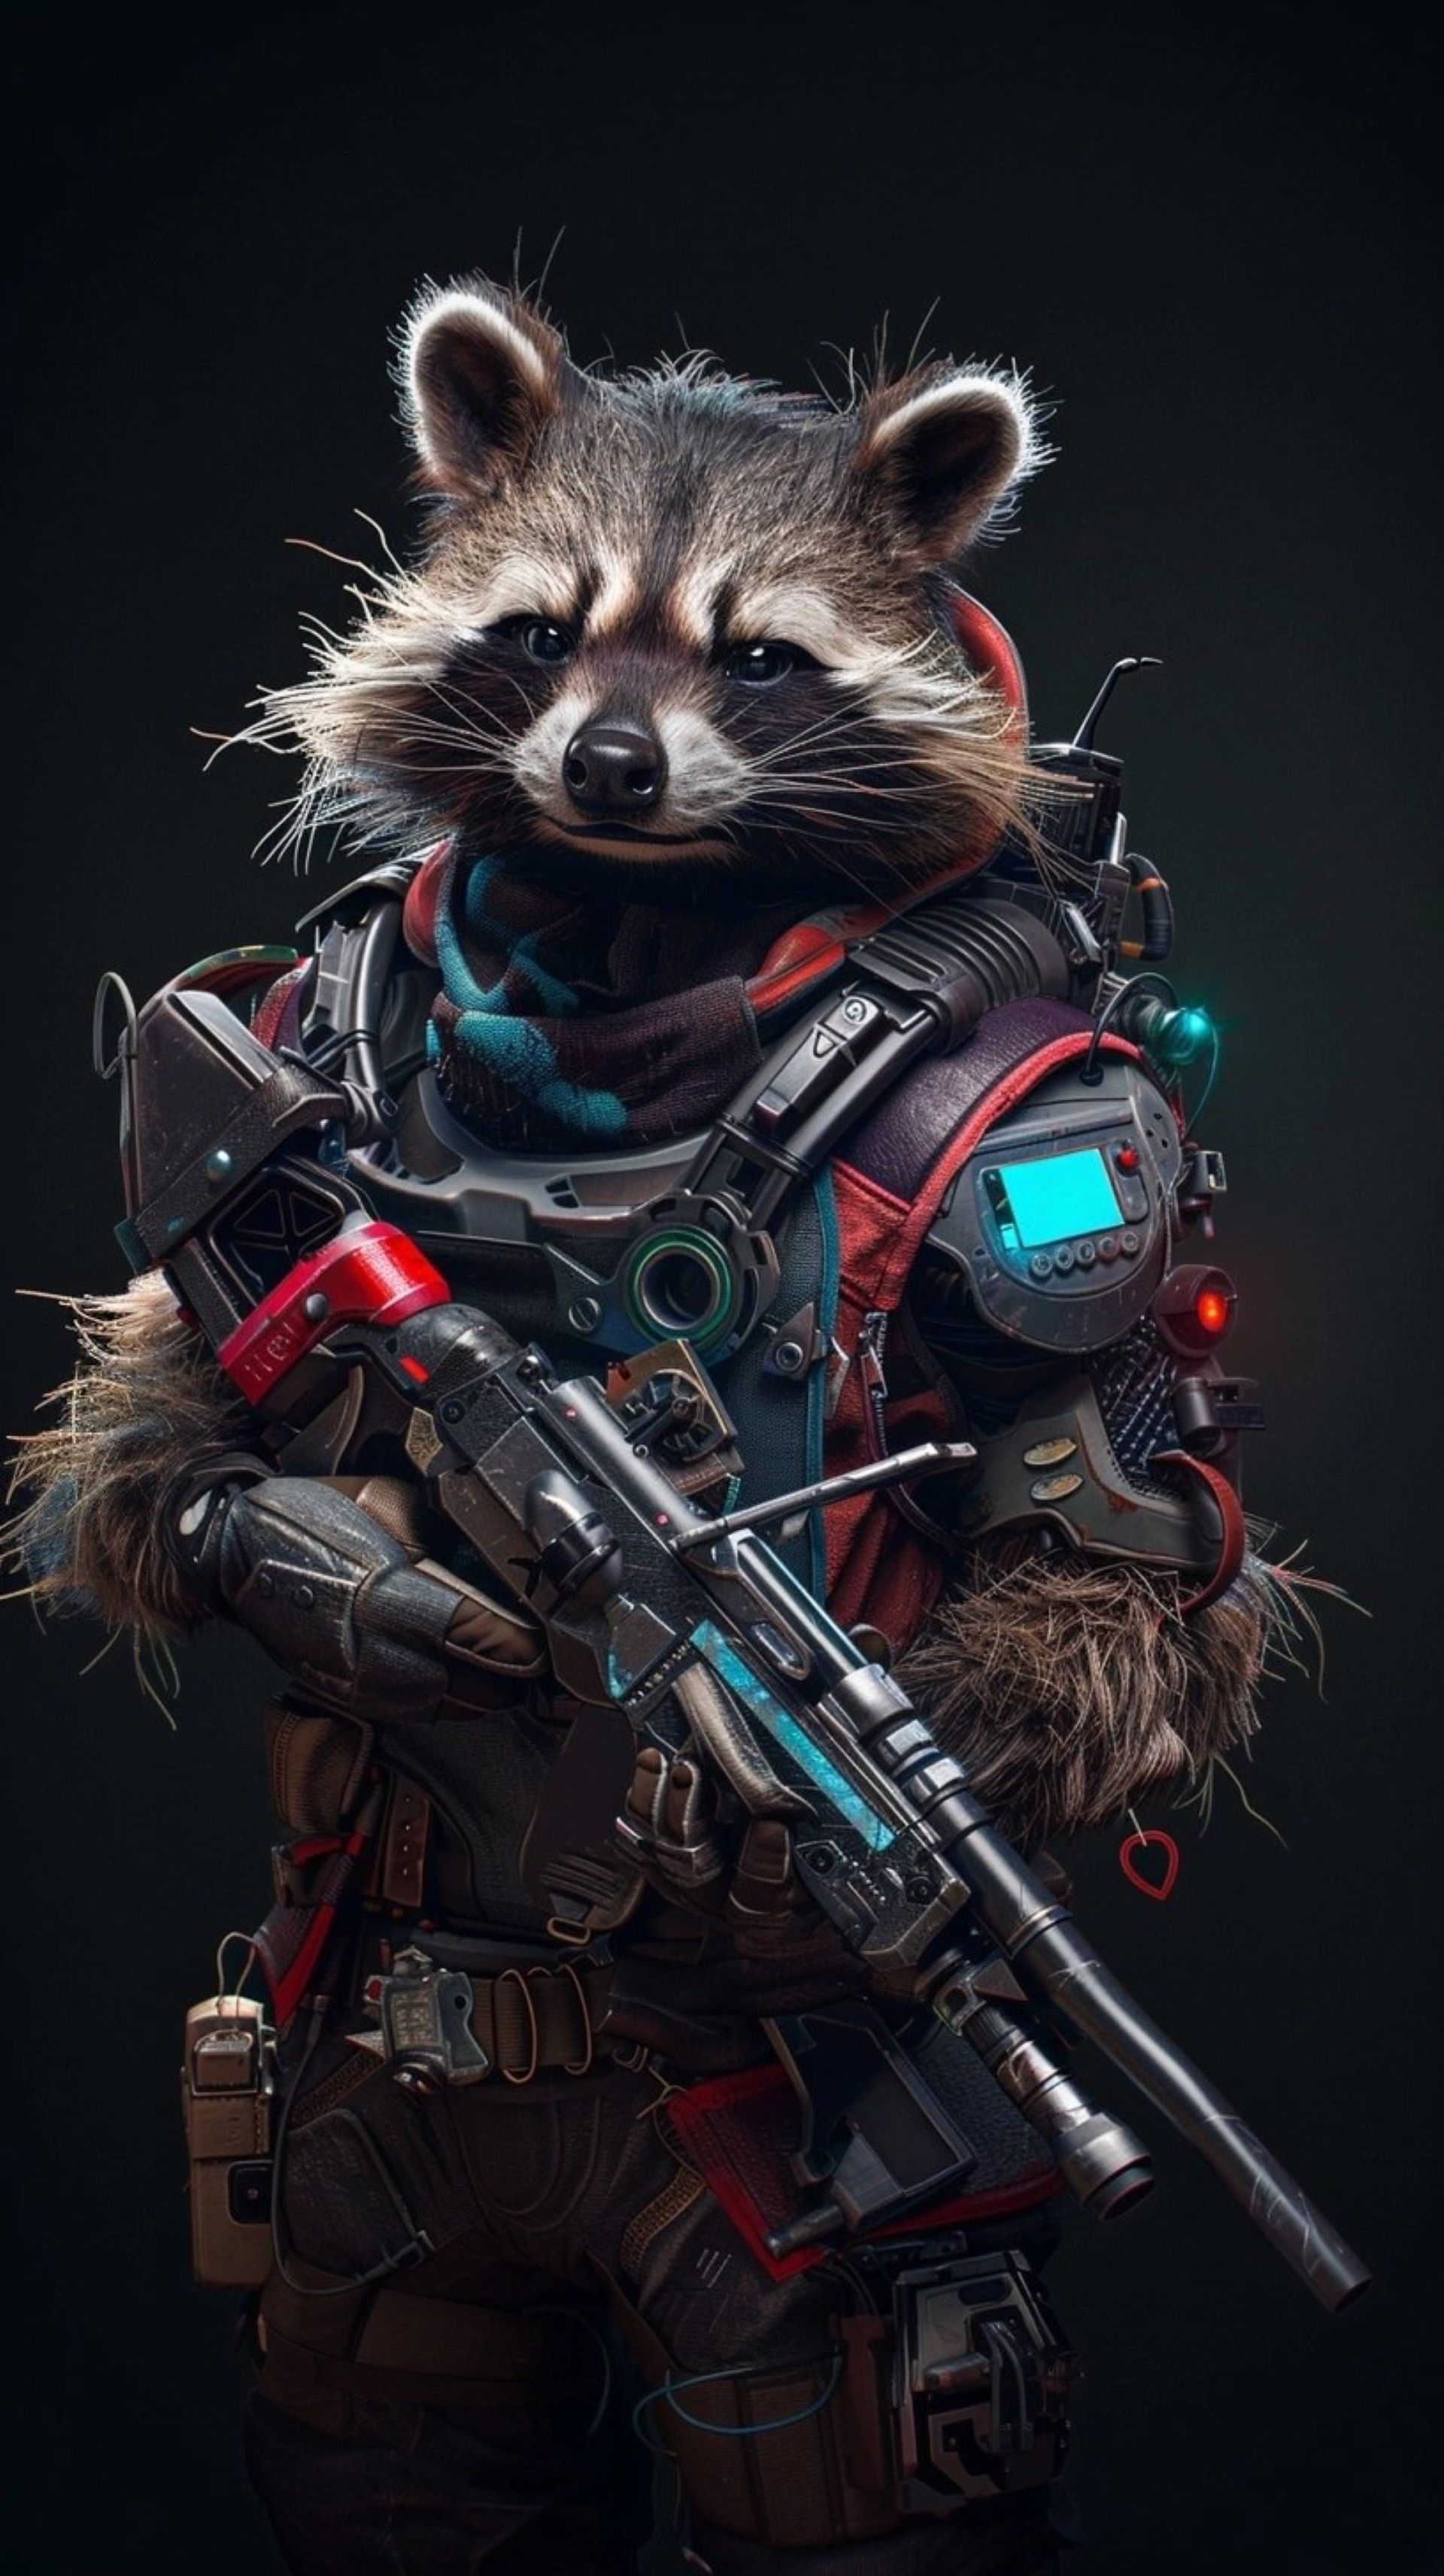 Rocket. Guardians of the galaxy